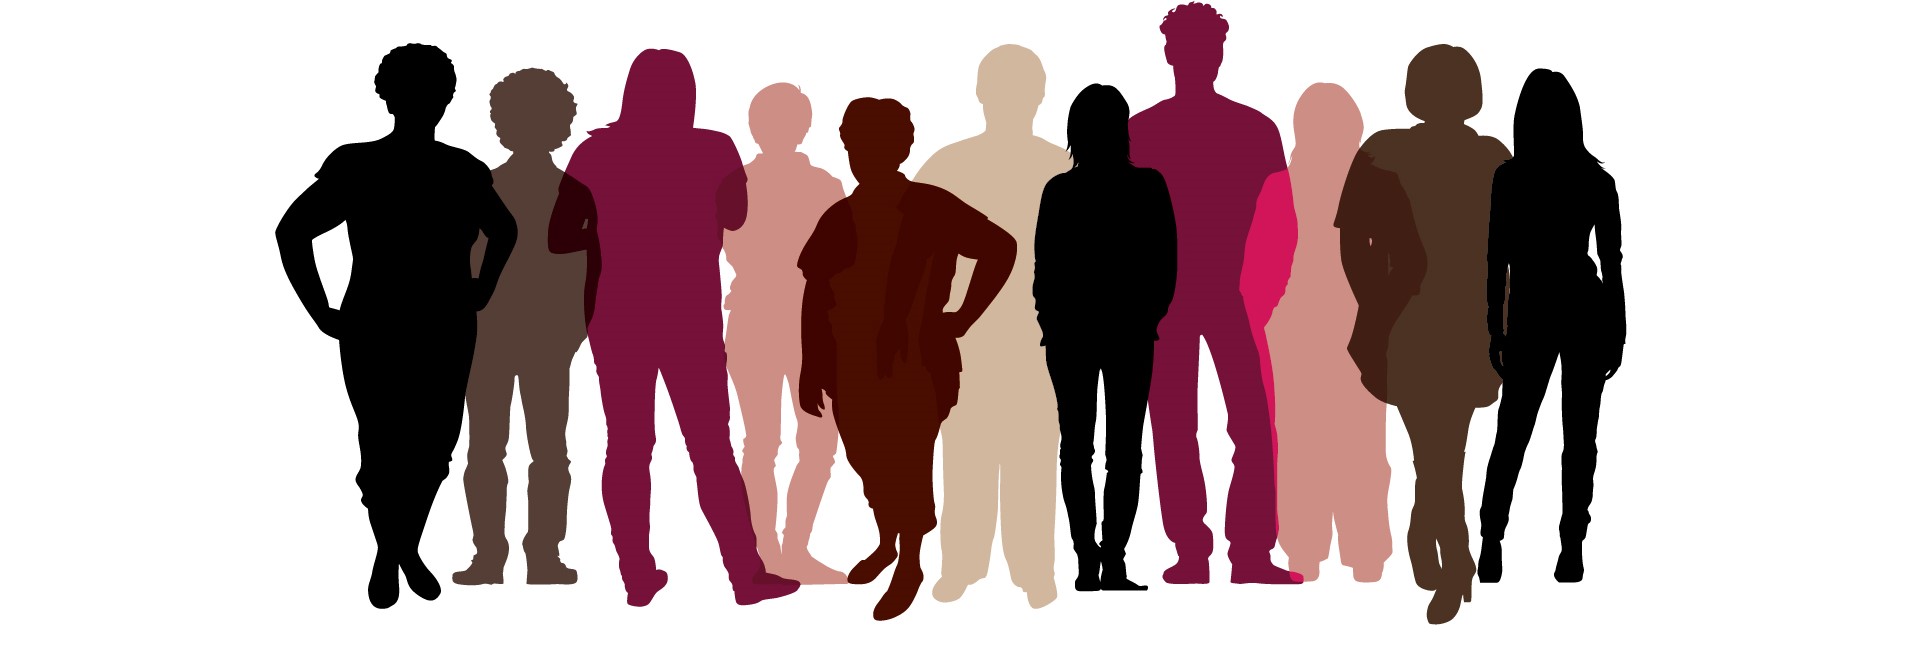 graphic of silhouettes of people